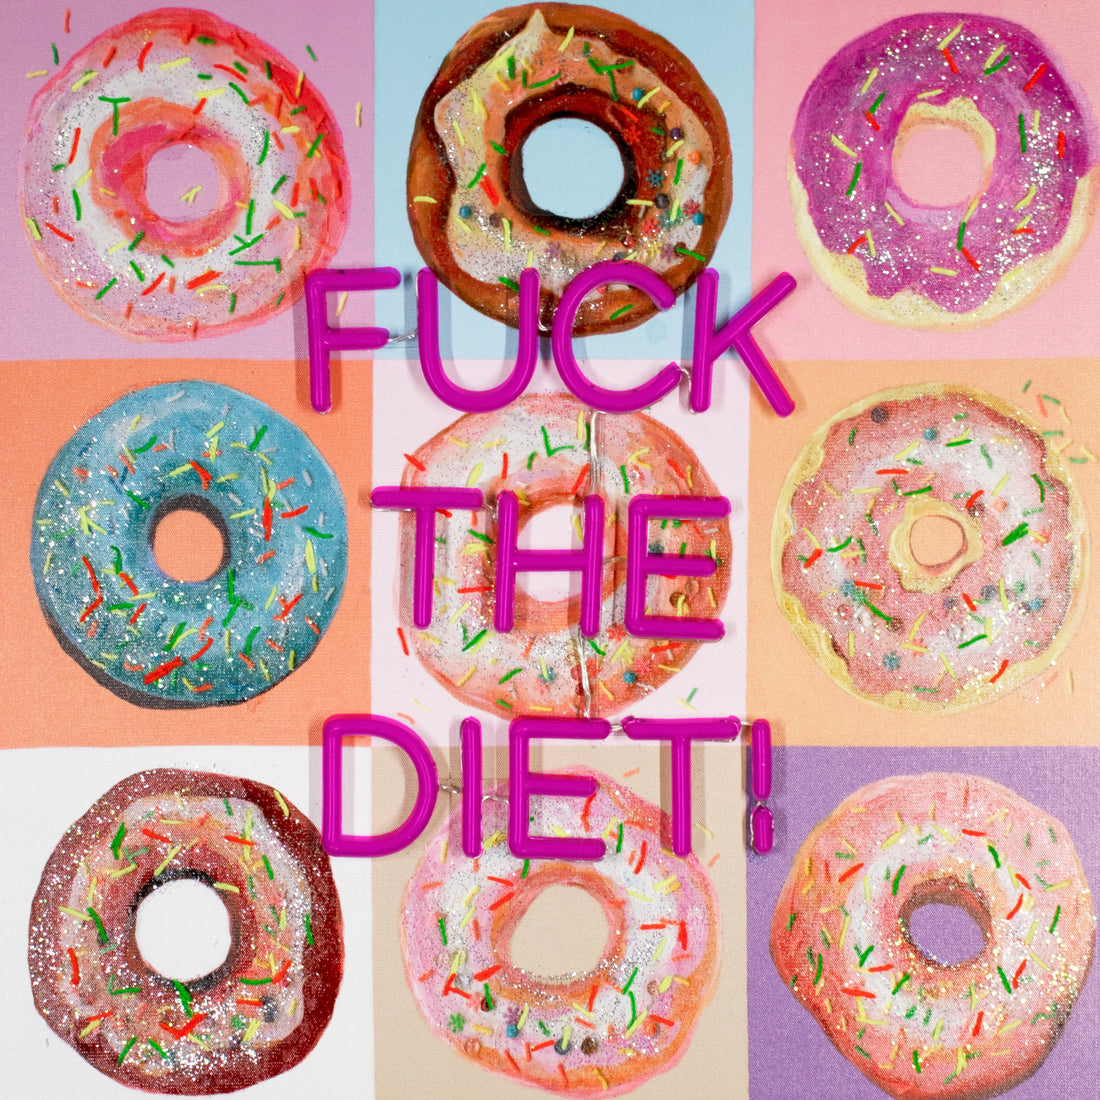 'F the Diet' Wall Artwork - LED Neon (R rated) - Locomocean